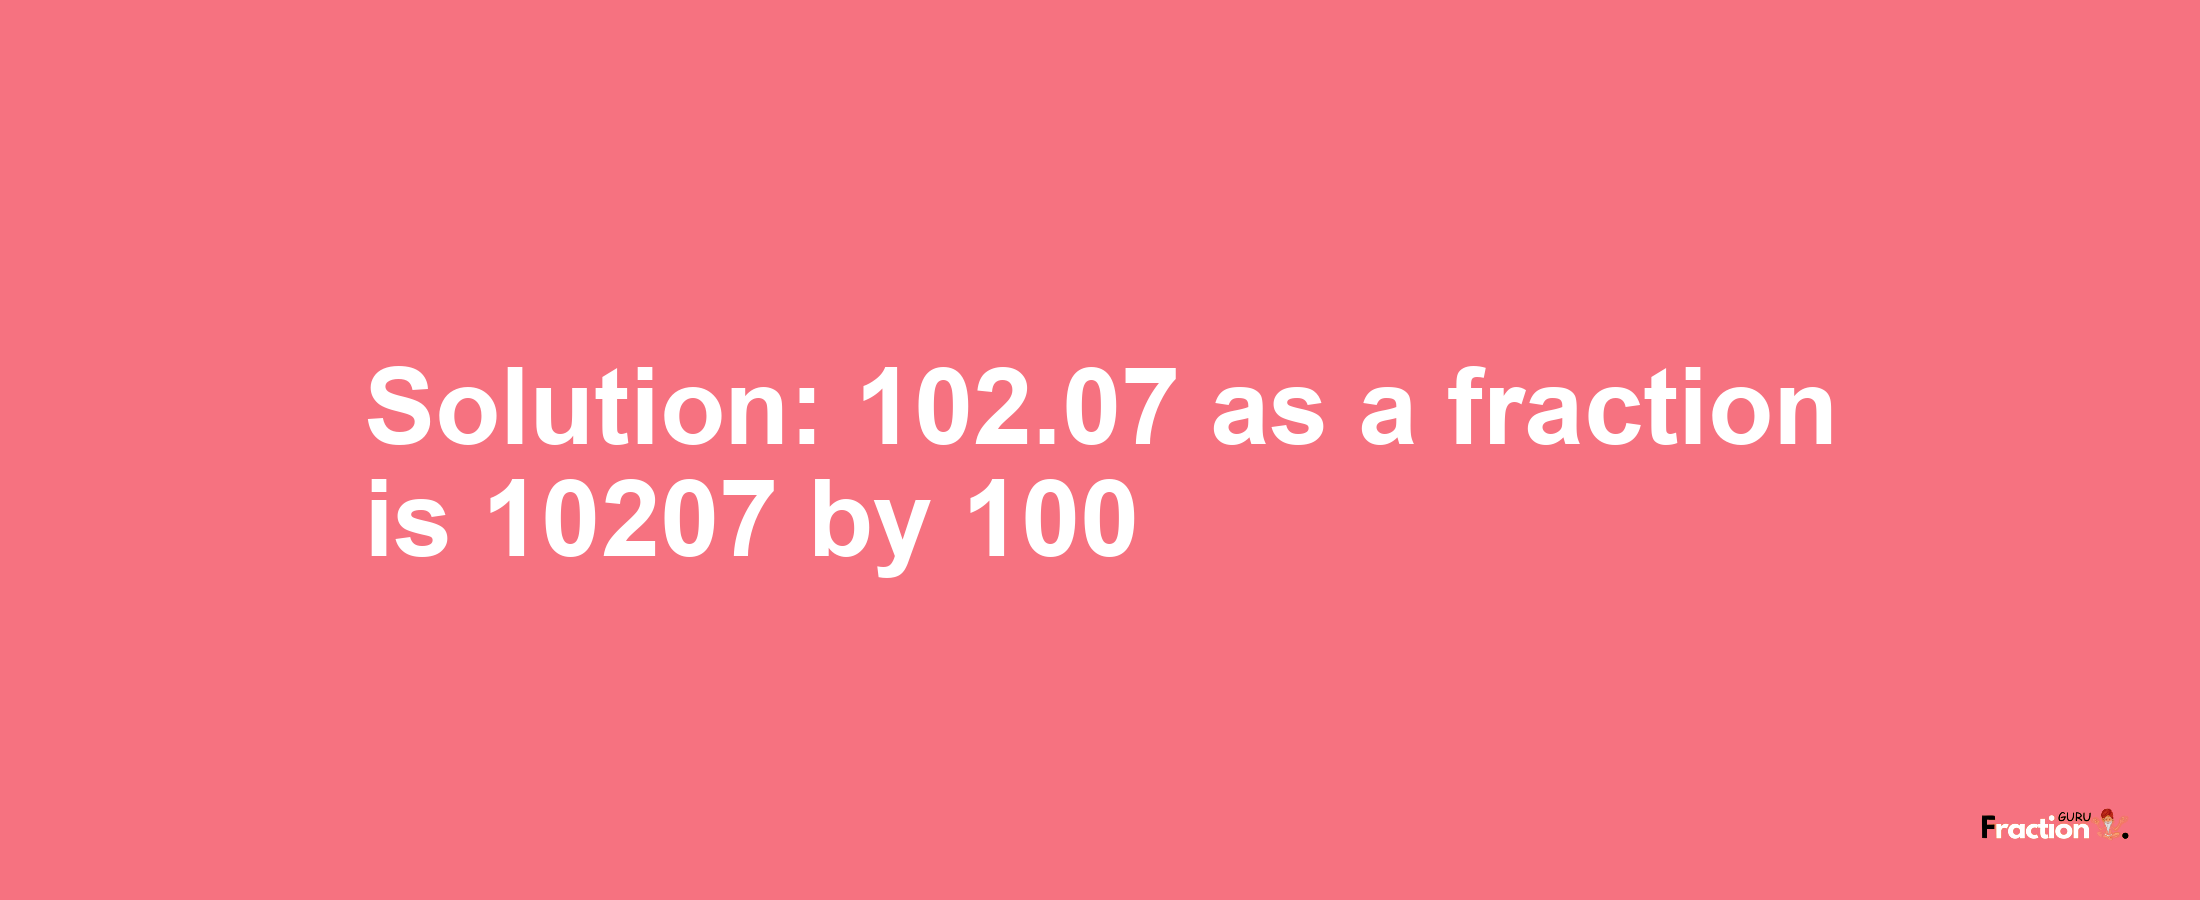 Solution:102.07 as a fraction is 10207/100